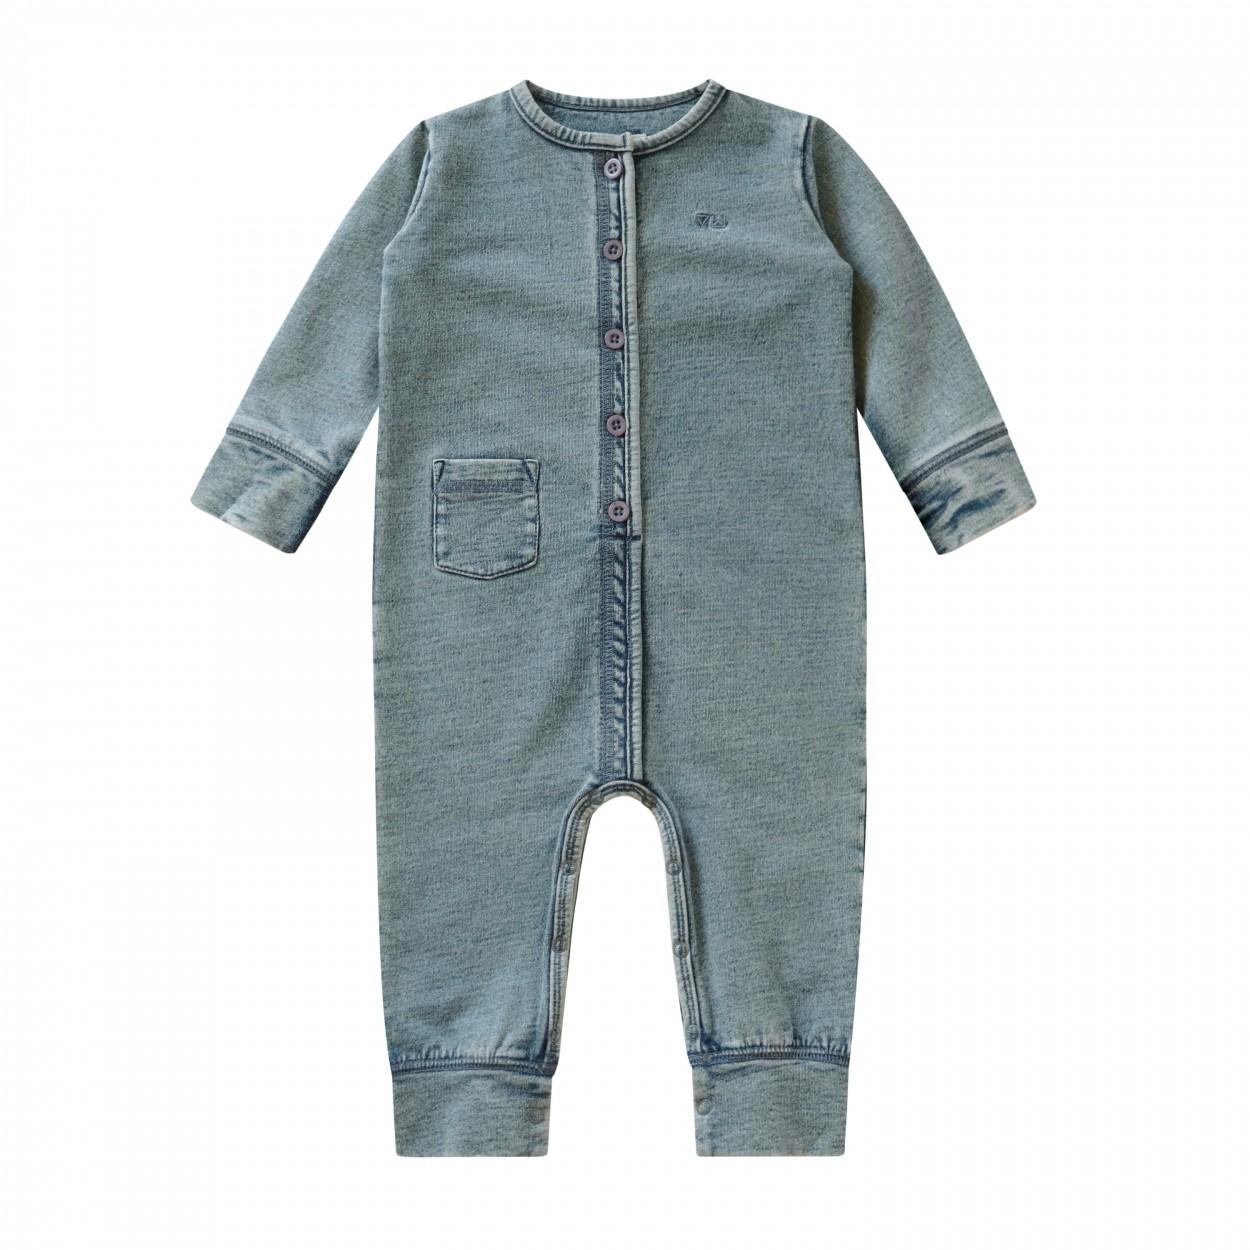 Your wishes - Jarne Knitted Denim Lake Blue